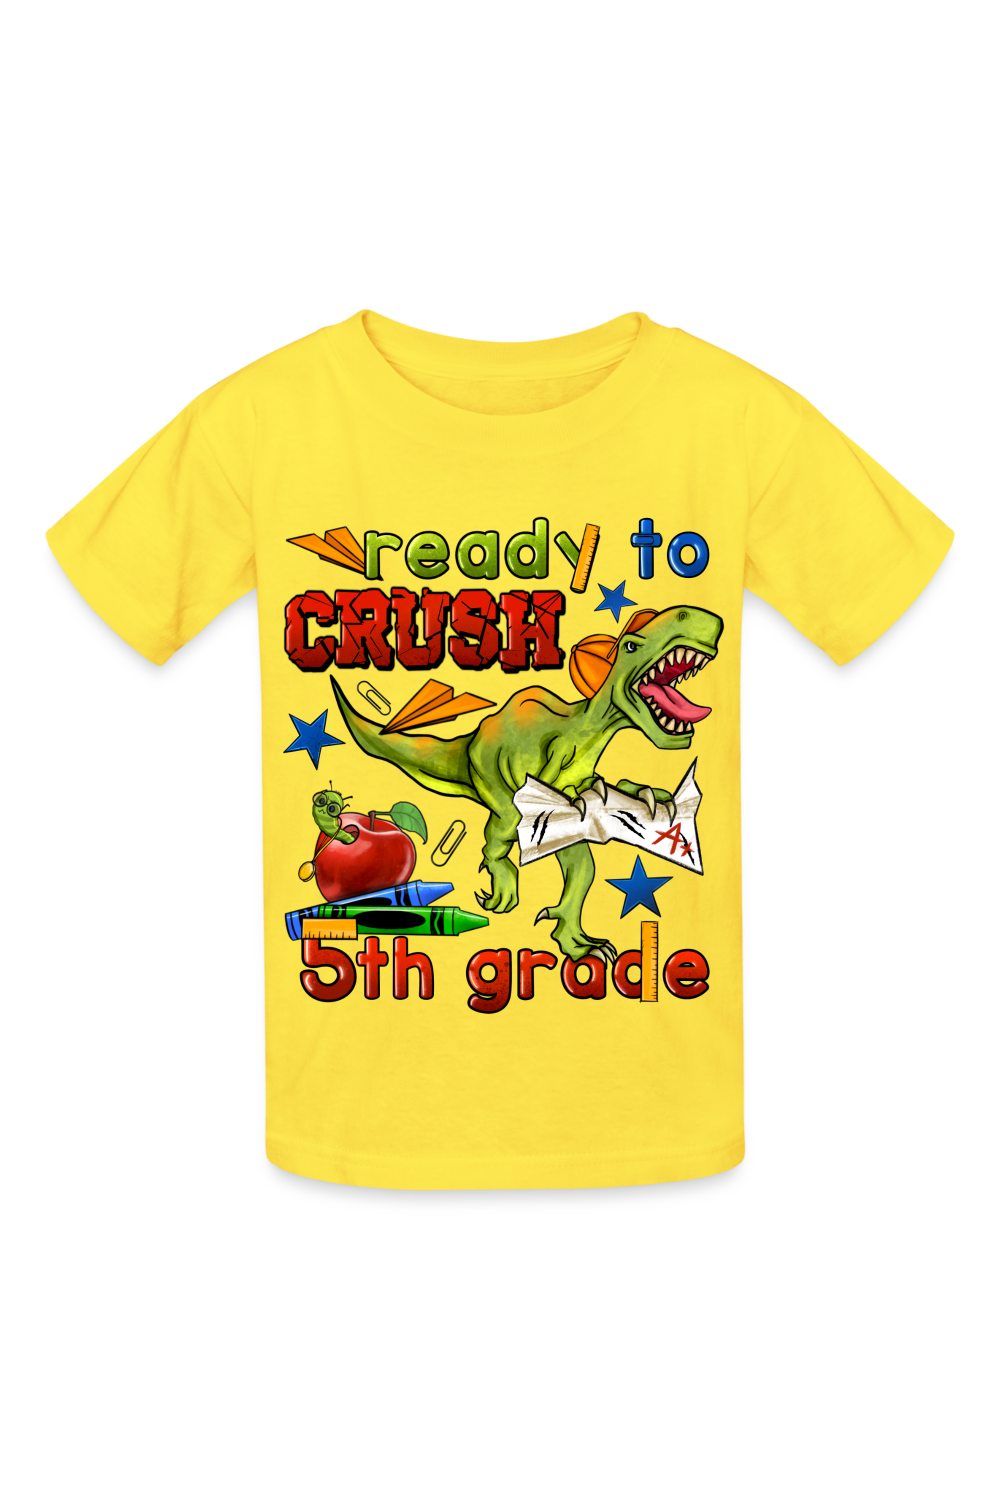 Boys Ready To Crush Fifth Grade Short Sleeve Tee Shirts for Back To School - yellow - NicholesGifts.online